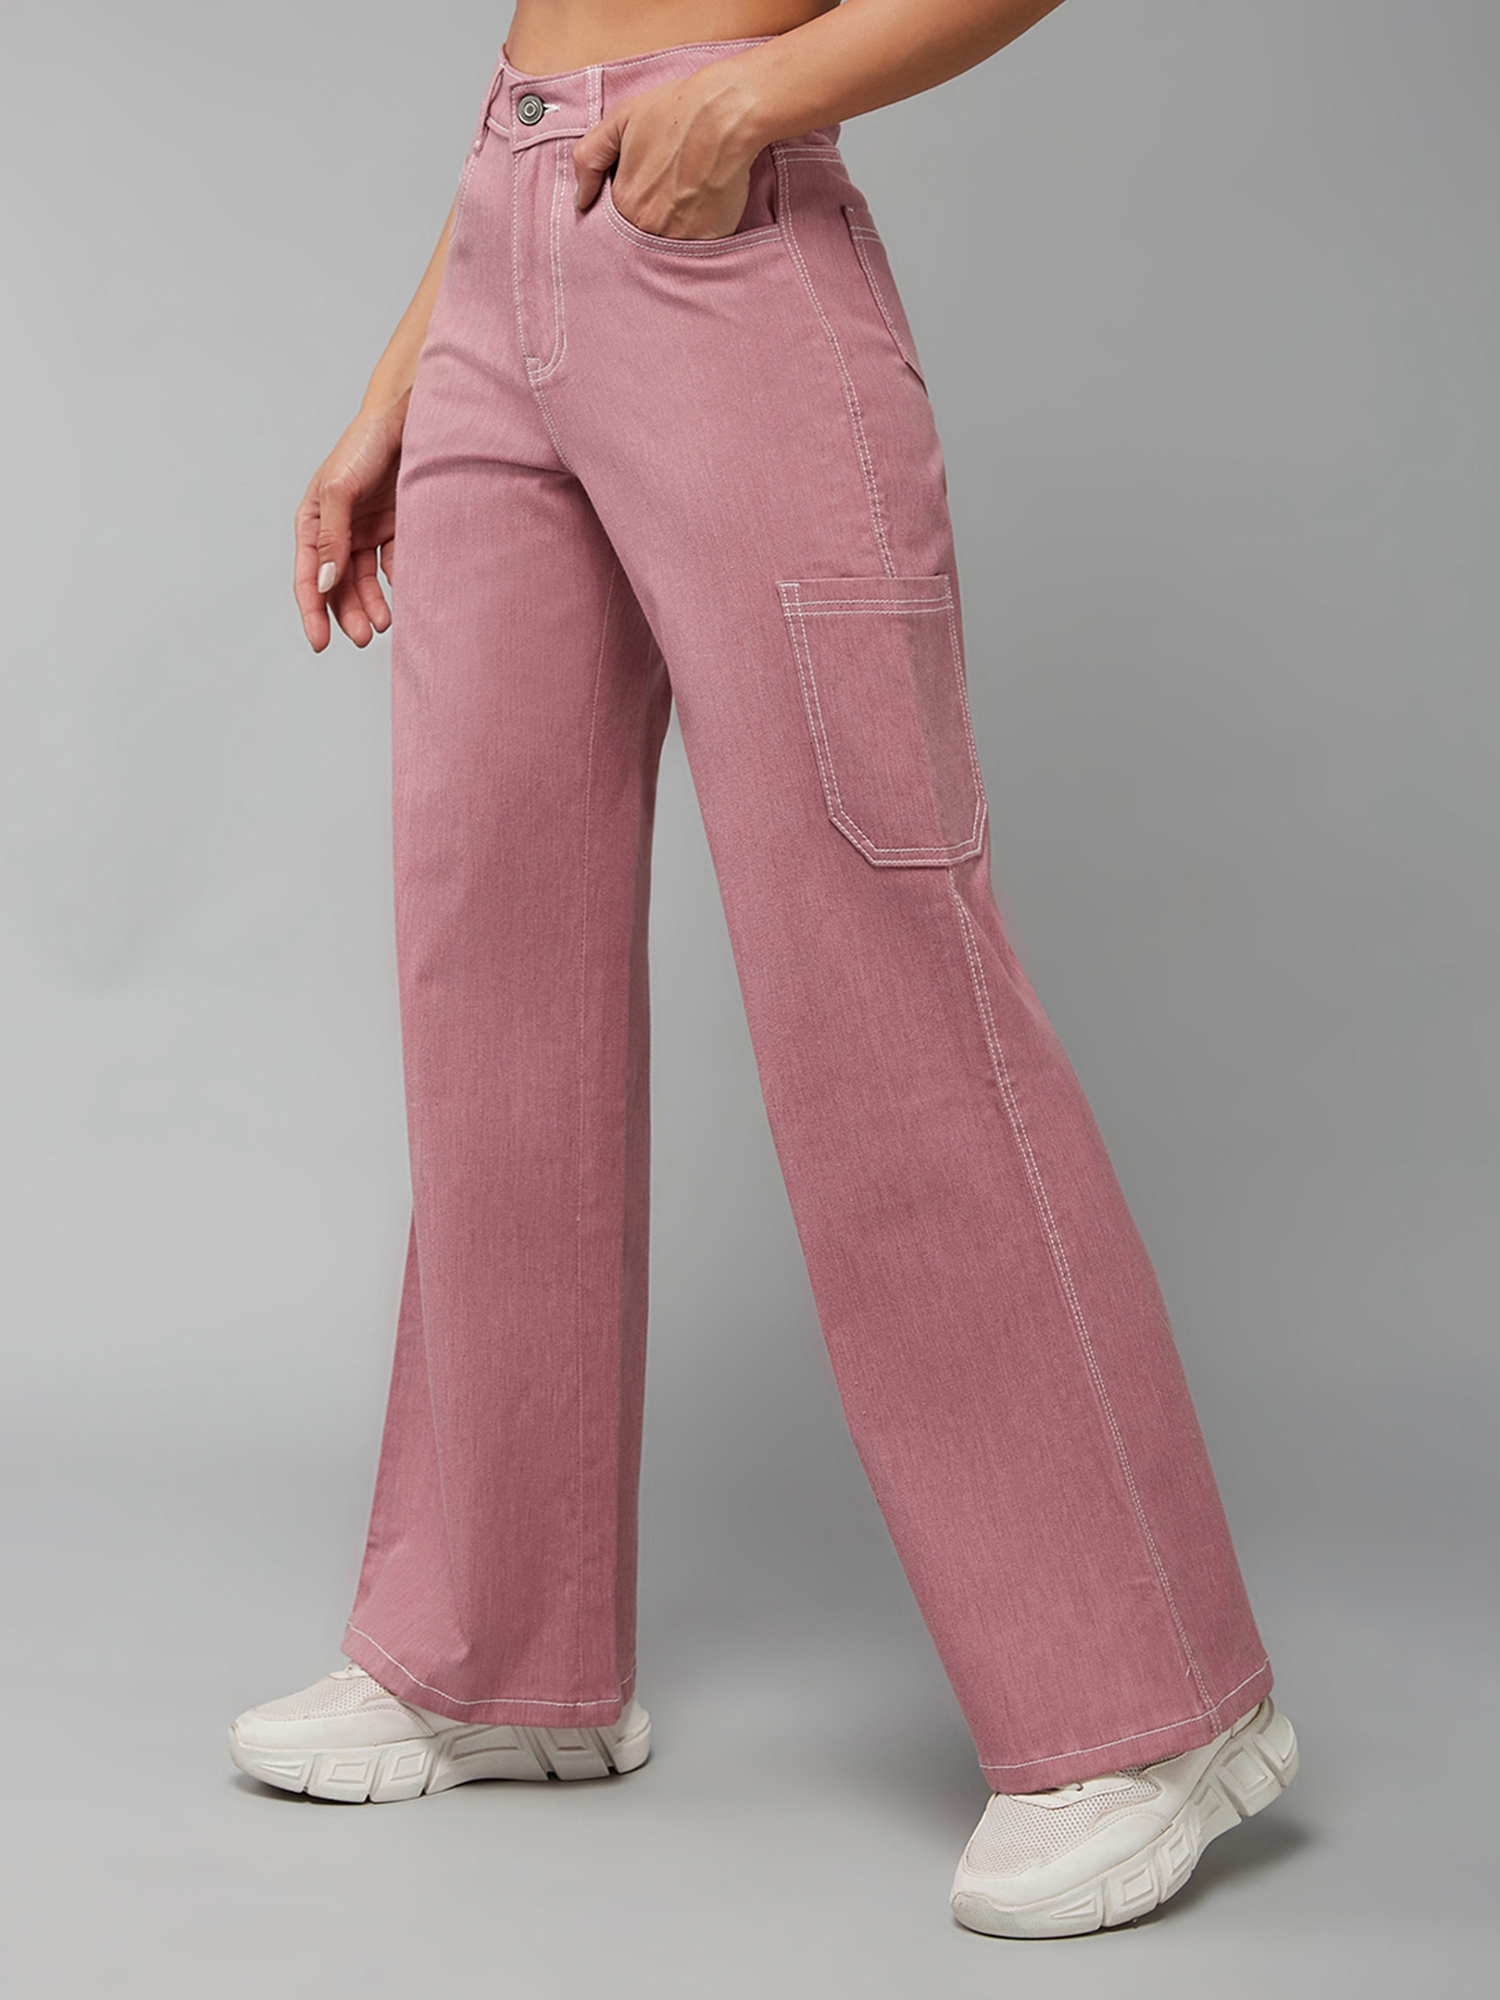 High Waisted Build Up Corset Ultra Wide Leg Jeans | bebe